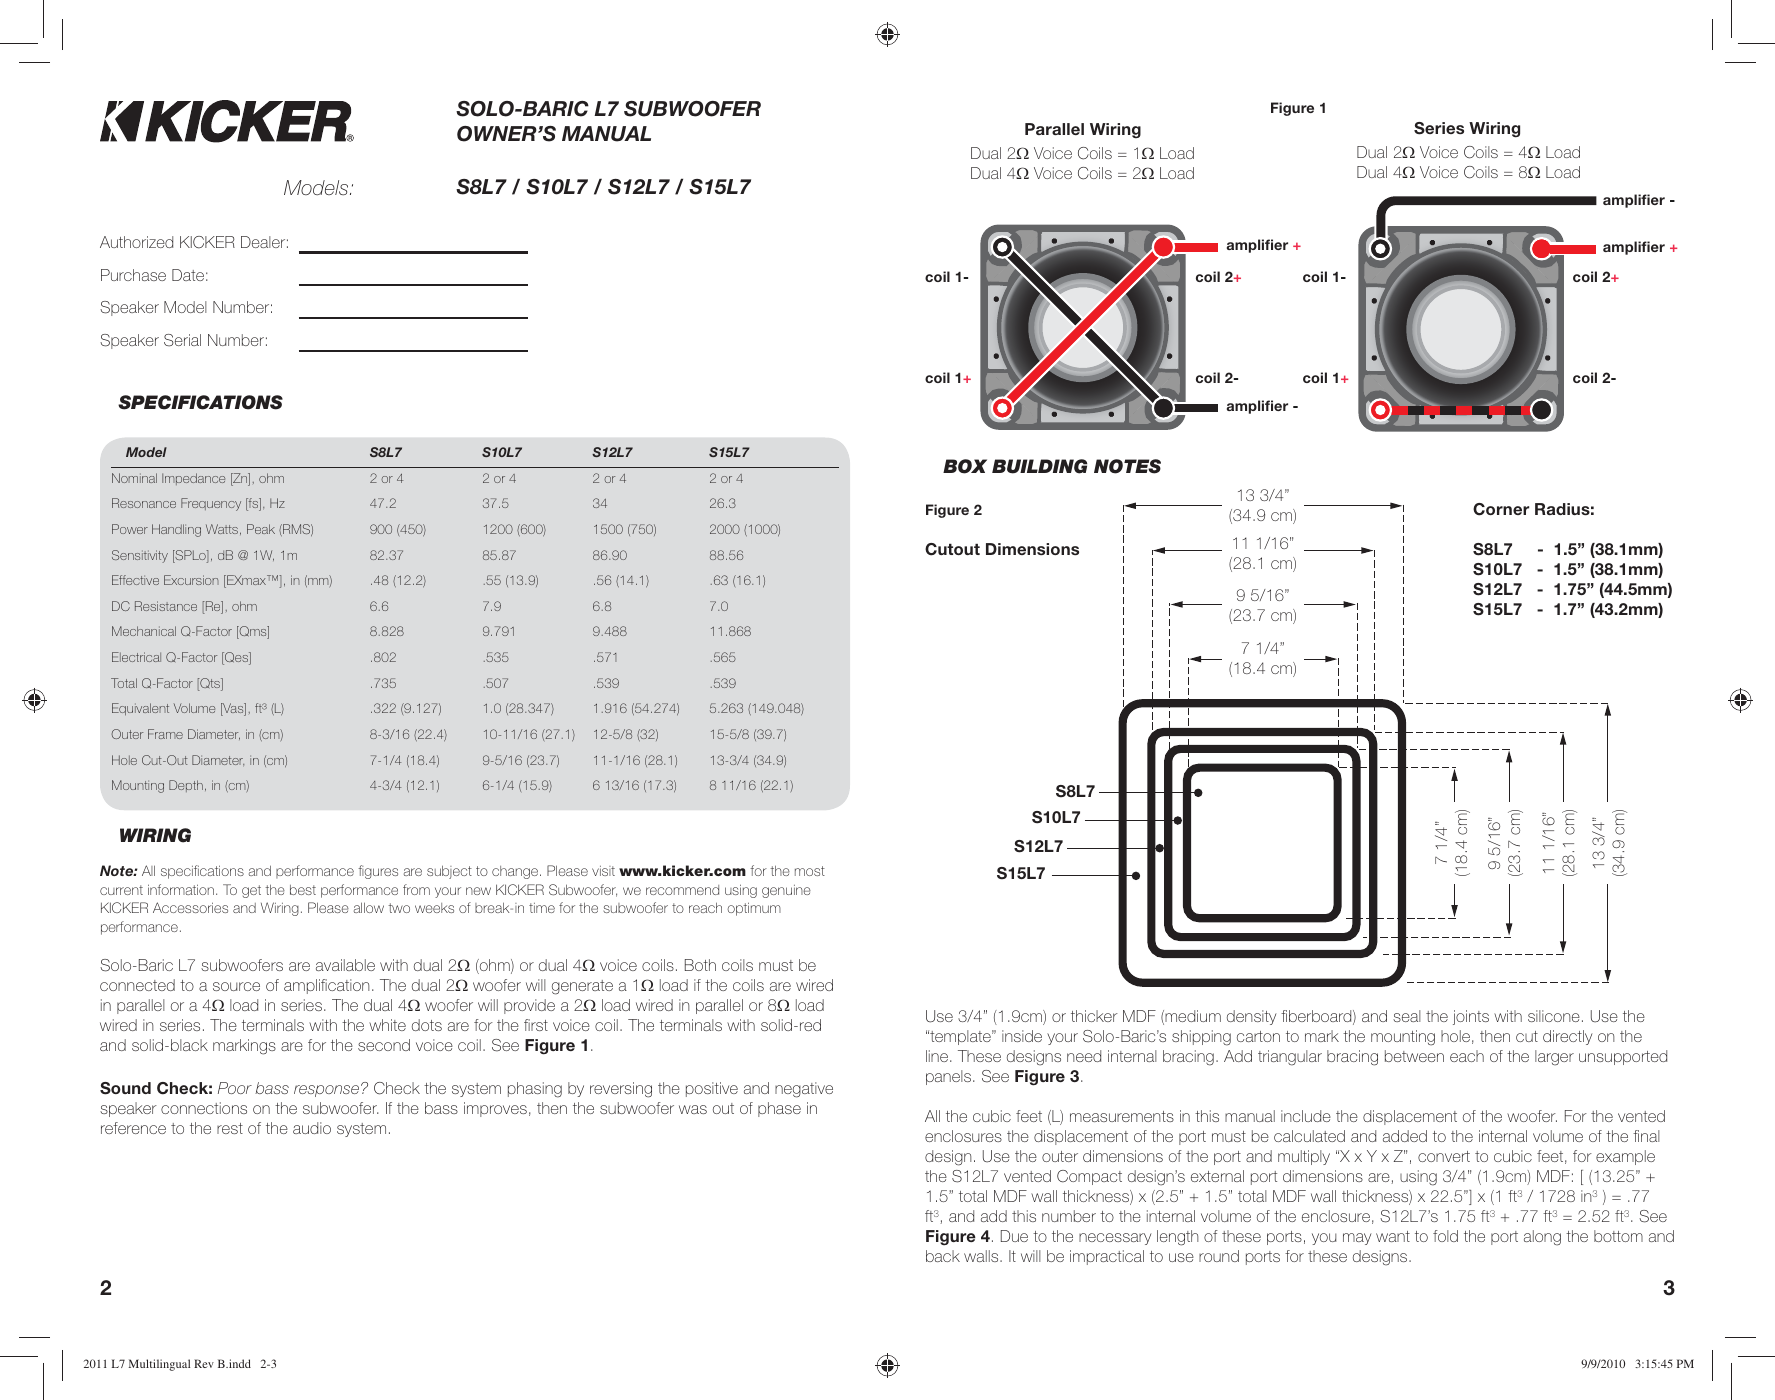 Page 2 of 11 - Kicker Kicker-2011-Solo-Baric-L7-Owners-Manual- 2011 L7 Multilingual Rev B  Kicker-2011-solo-baric-l7-owners-manual